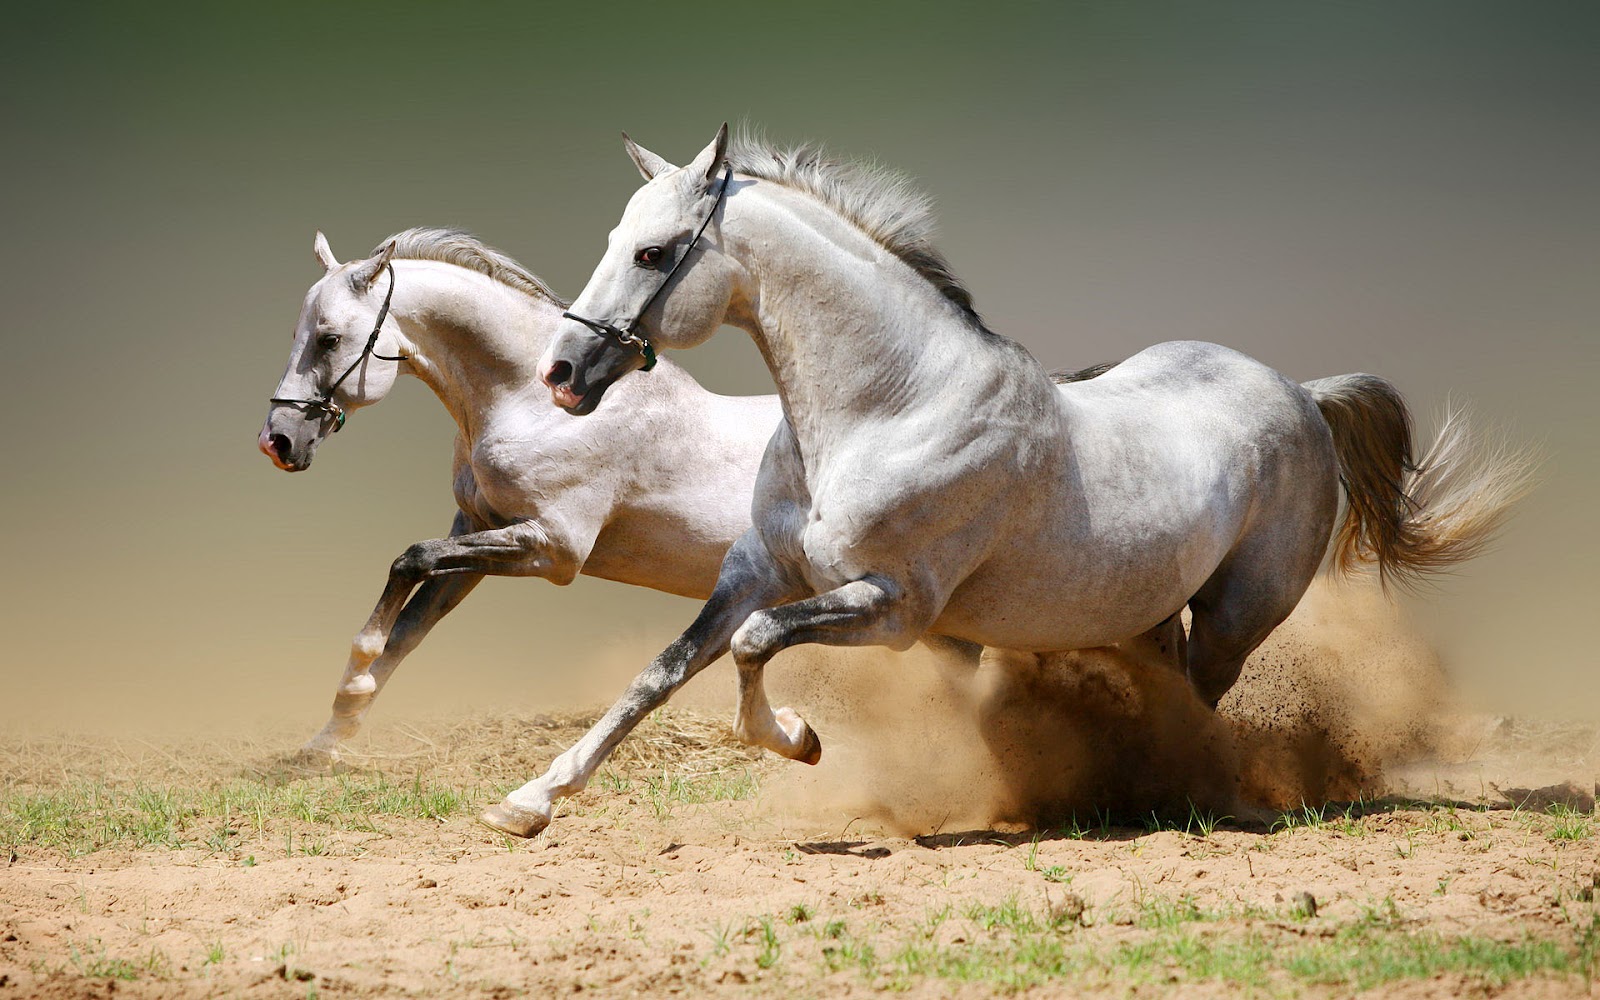 HD Animal Wallpaper With White Horses Running Fast Horse